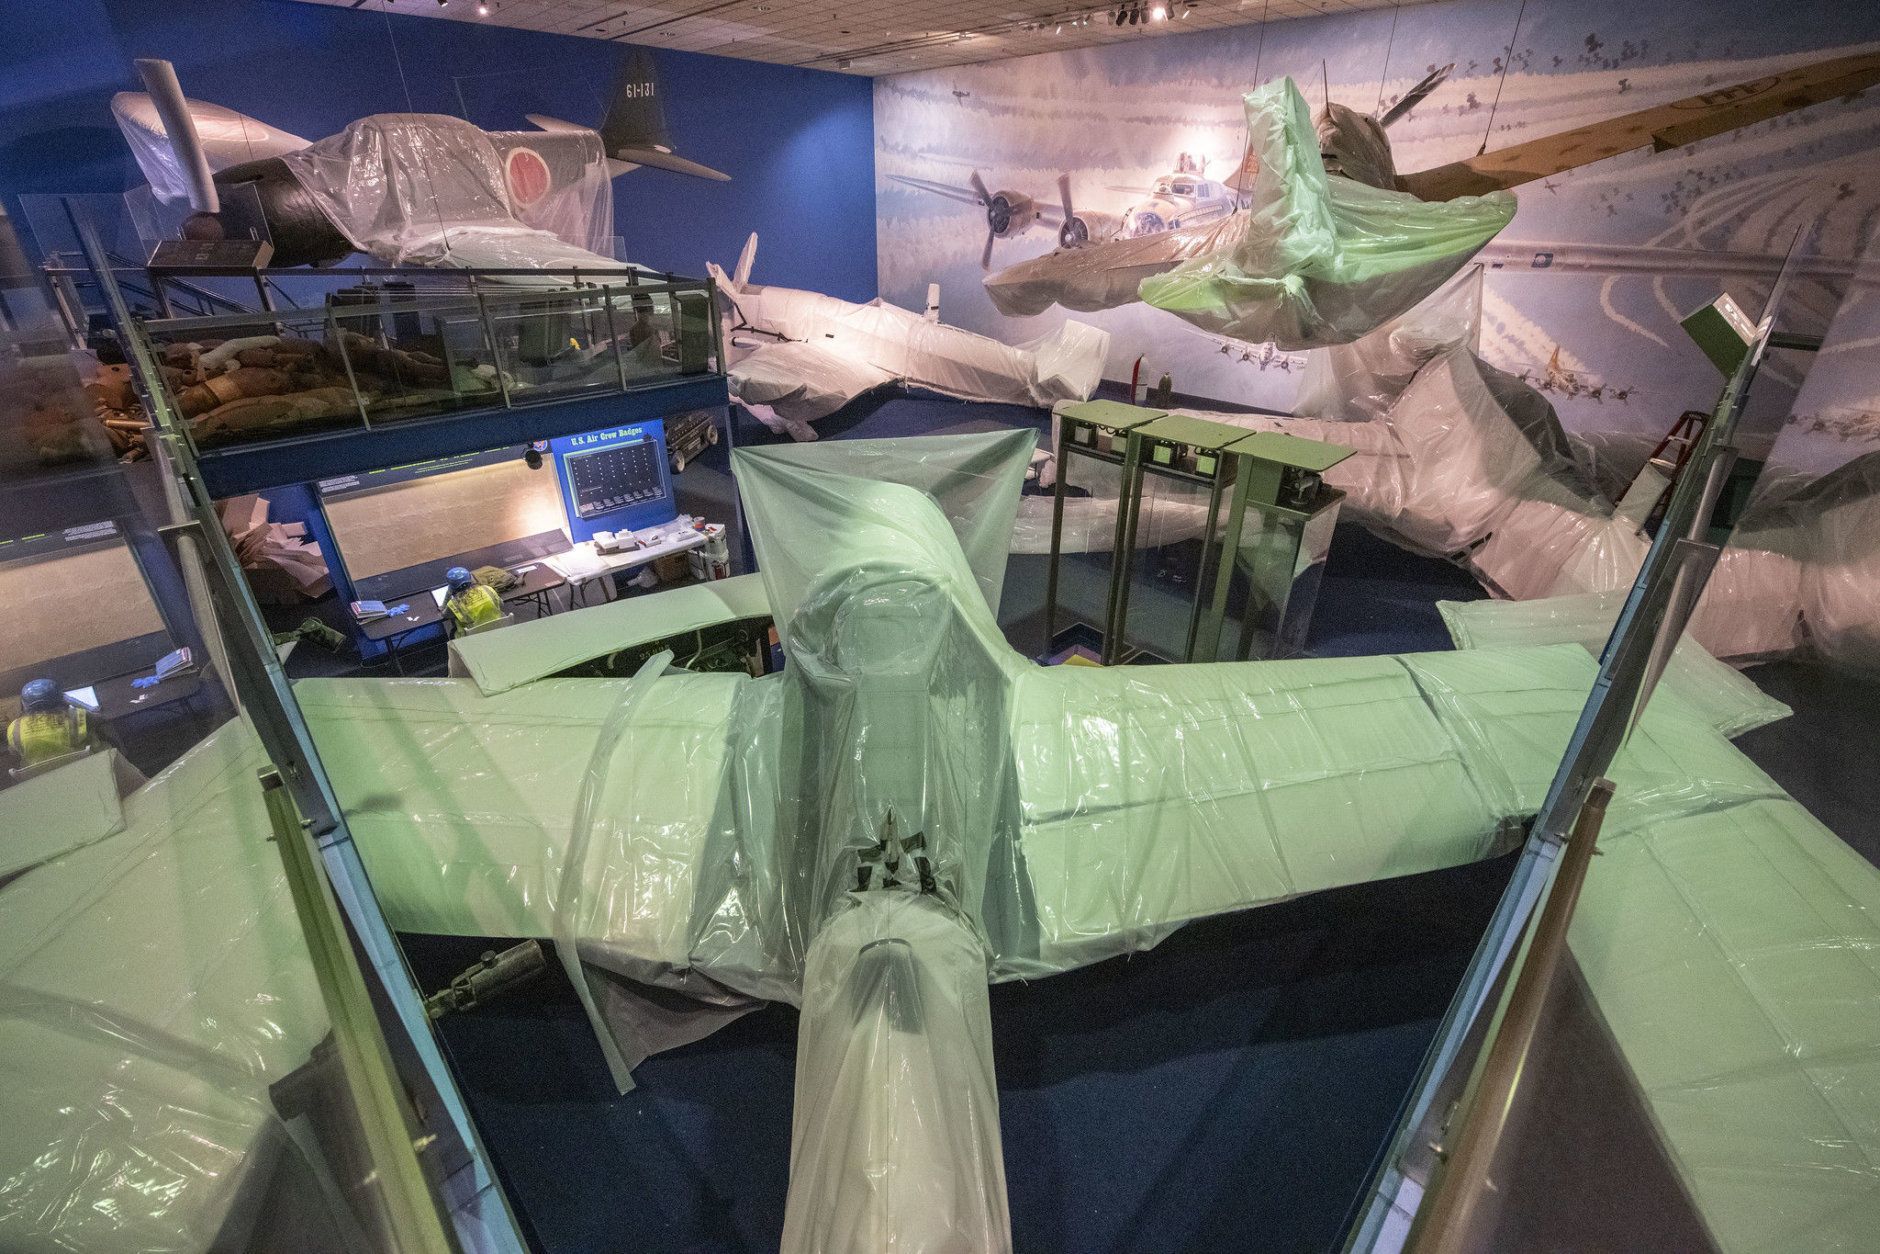 Aircraft are wrapped for protection prior to stage one demolition in the closed World War II Gallery in the National Air and Space Museum in Washington, DC, March 5, 2019. (Smithsonian photo by Jim Preston)  Material is subject to Smithsonian Terms of Use. Should you wish to use National Air and Space material in any medium, please submit an Application for Permission to Reproduce NASM Material, available at:  https://airandspace.si.edu/permissions